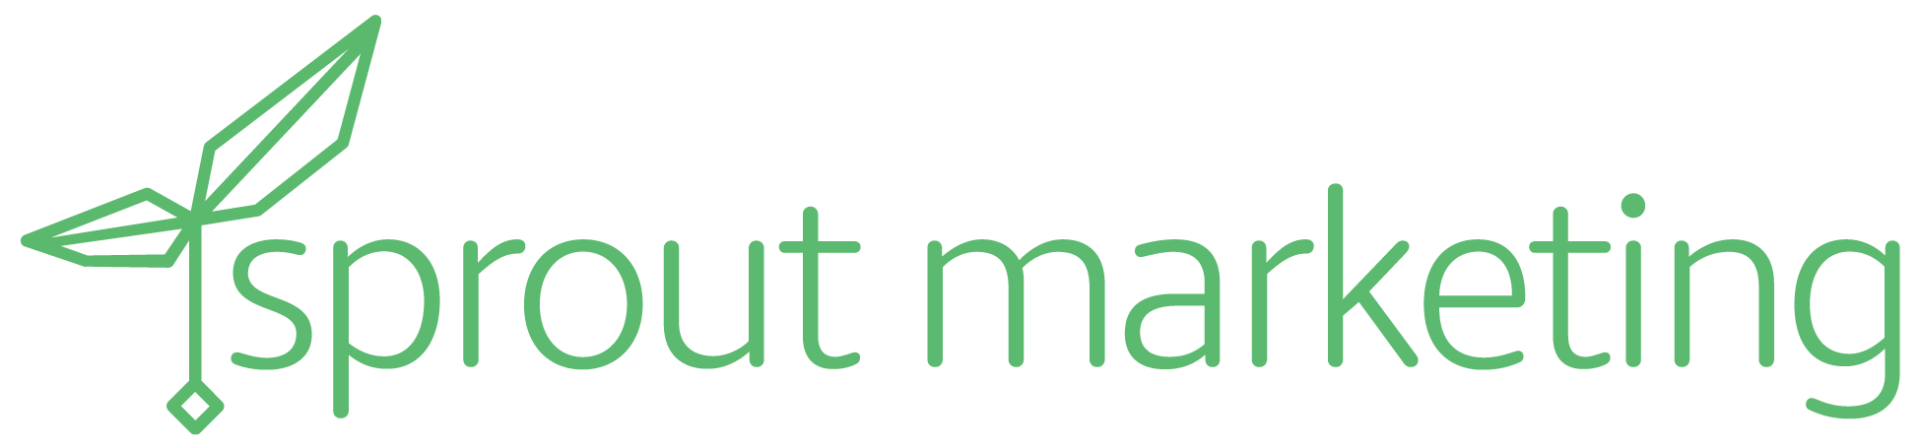 Sprout Marketing logo